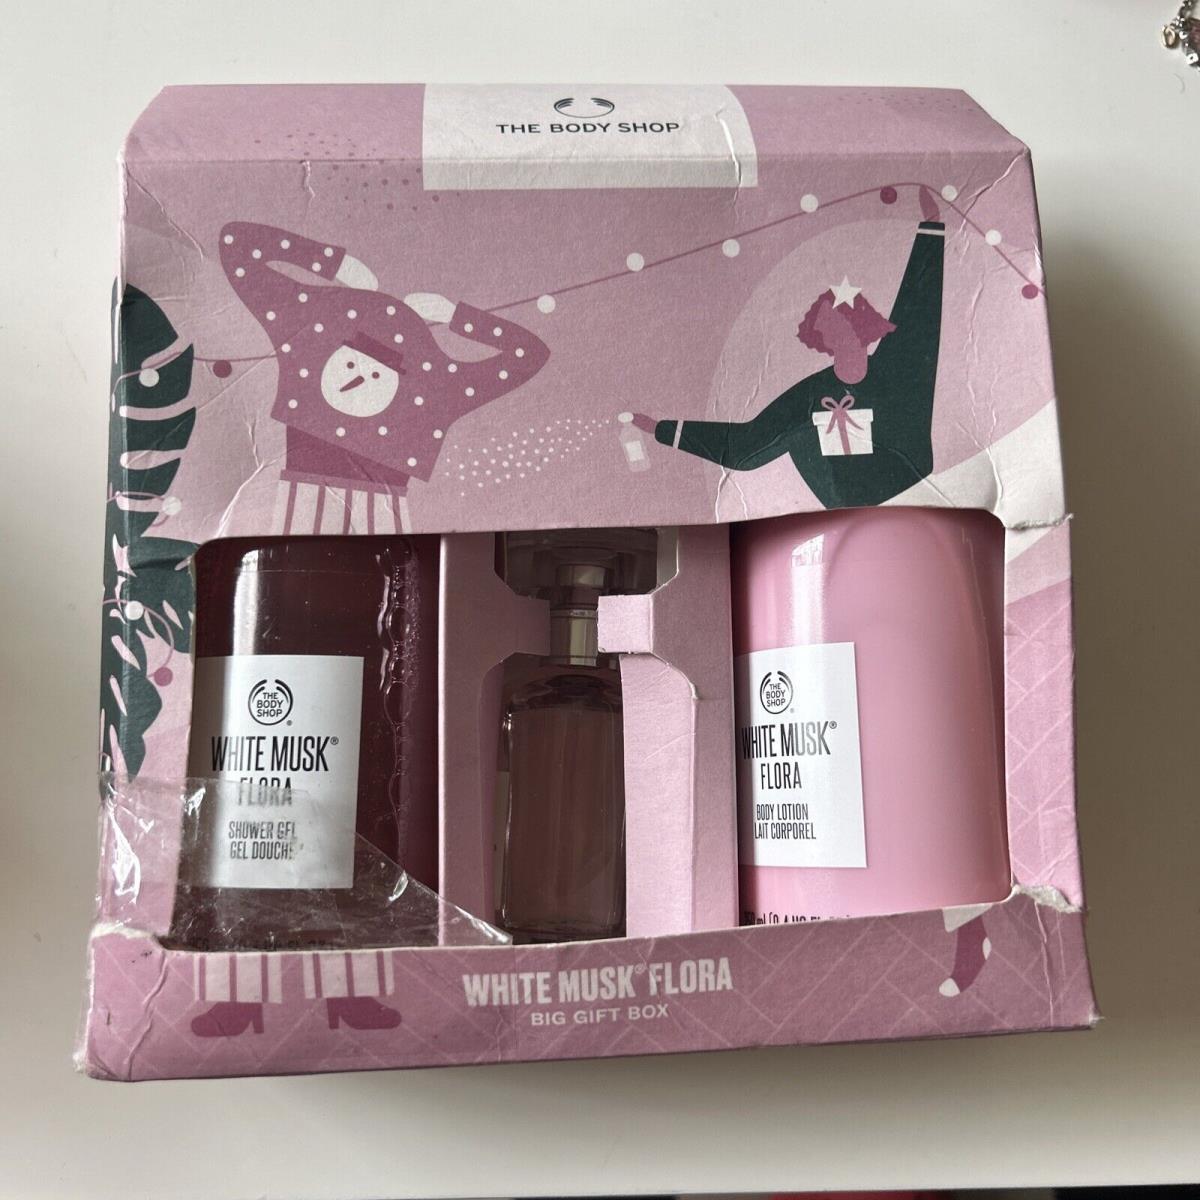 The Body Shop White Musk Flora Big Gift Box Lotion Shower Gel Edt Parfume